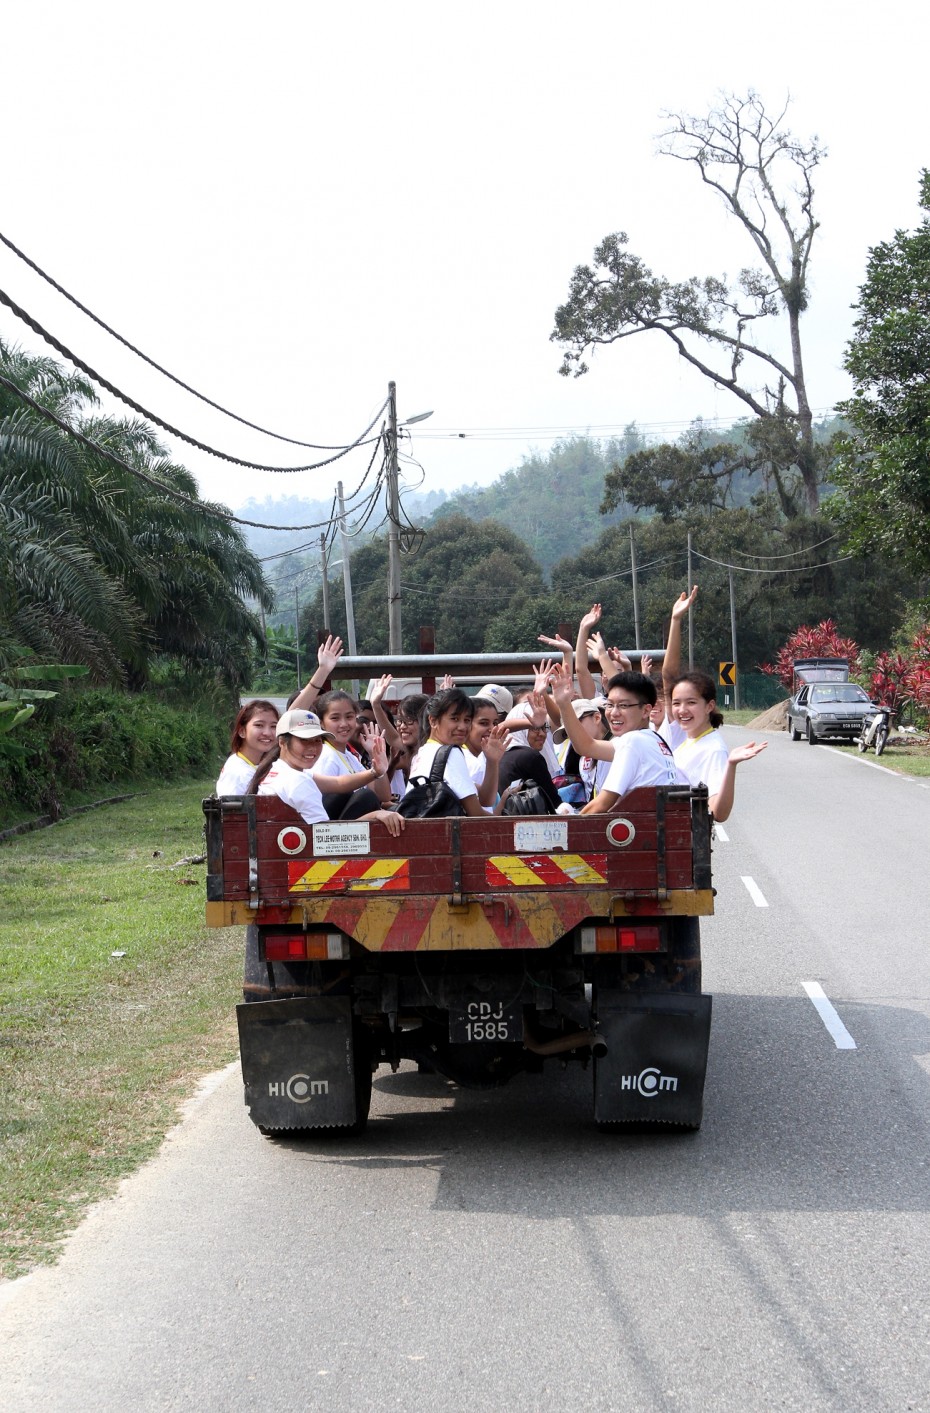 The journey to the Sungai Dalam orang asli village was an adventure in itself as the BRATs got to ride through the jungle on the back of a truck